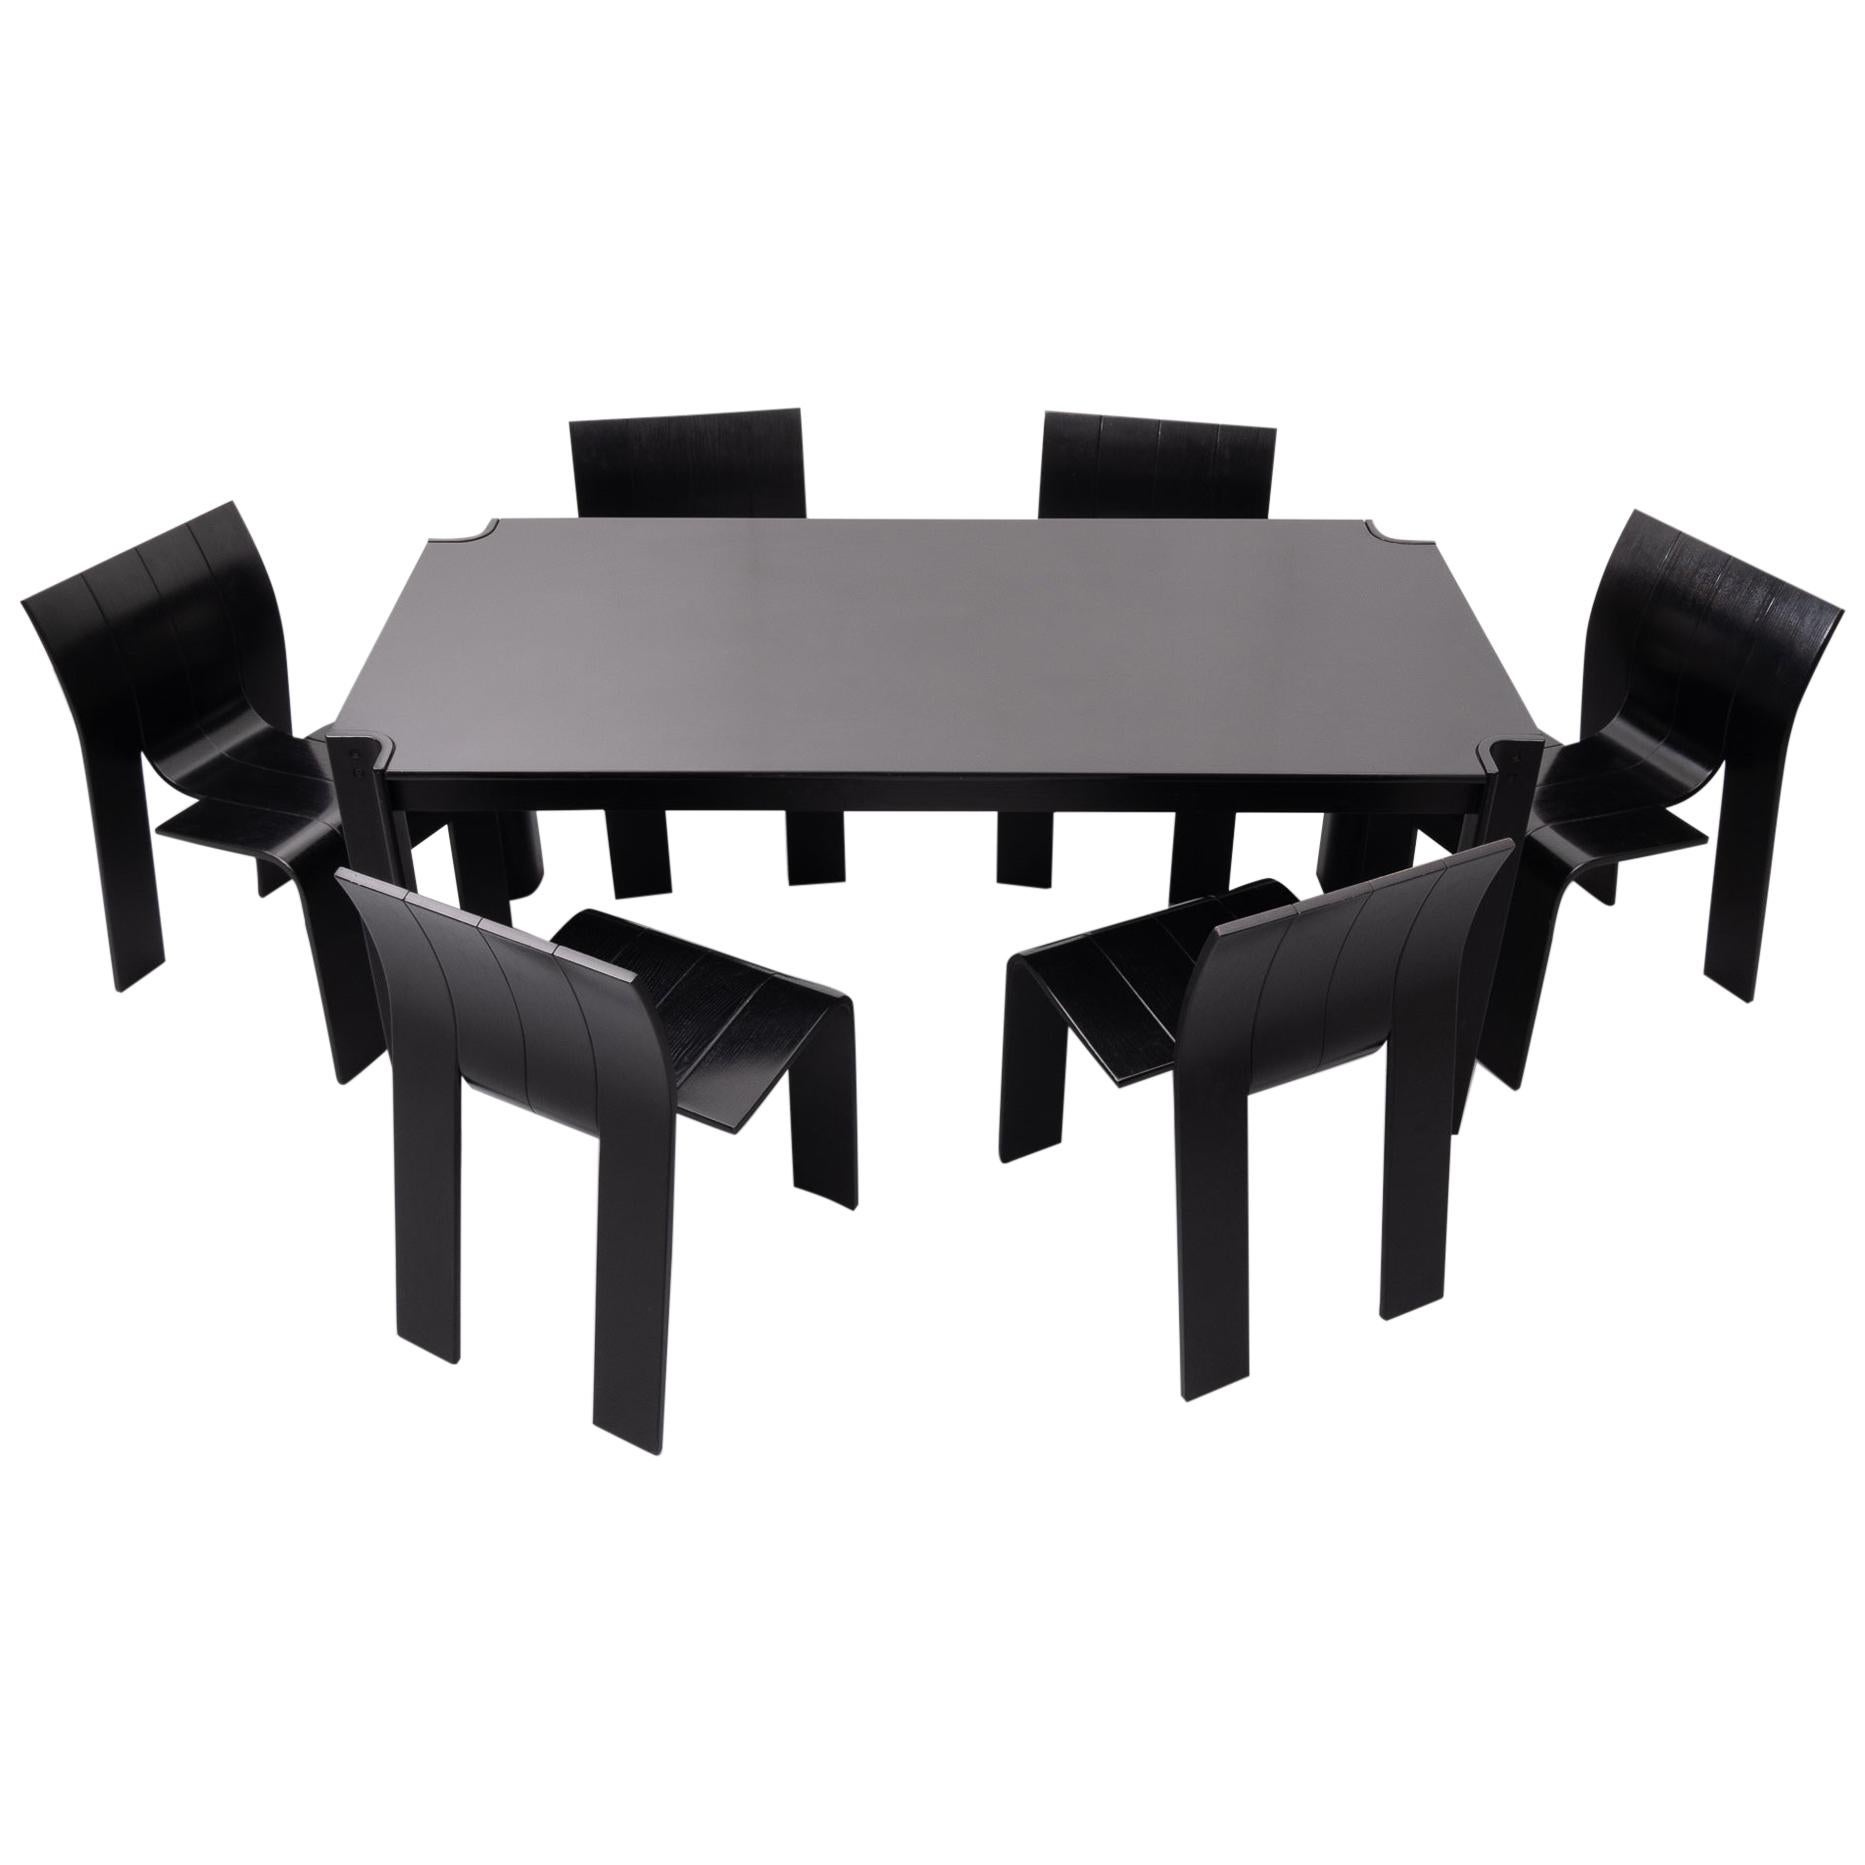 Gijs Bakker 6 Strip Chairs and Dining Table Dining Set, 1970s